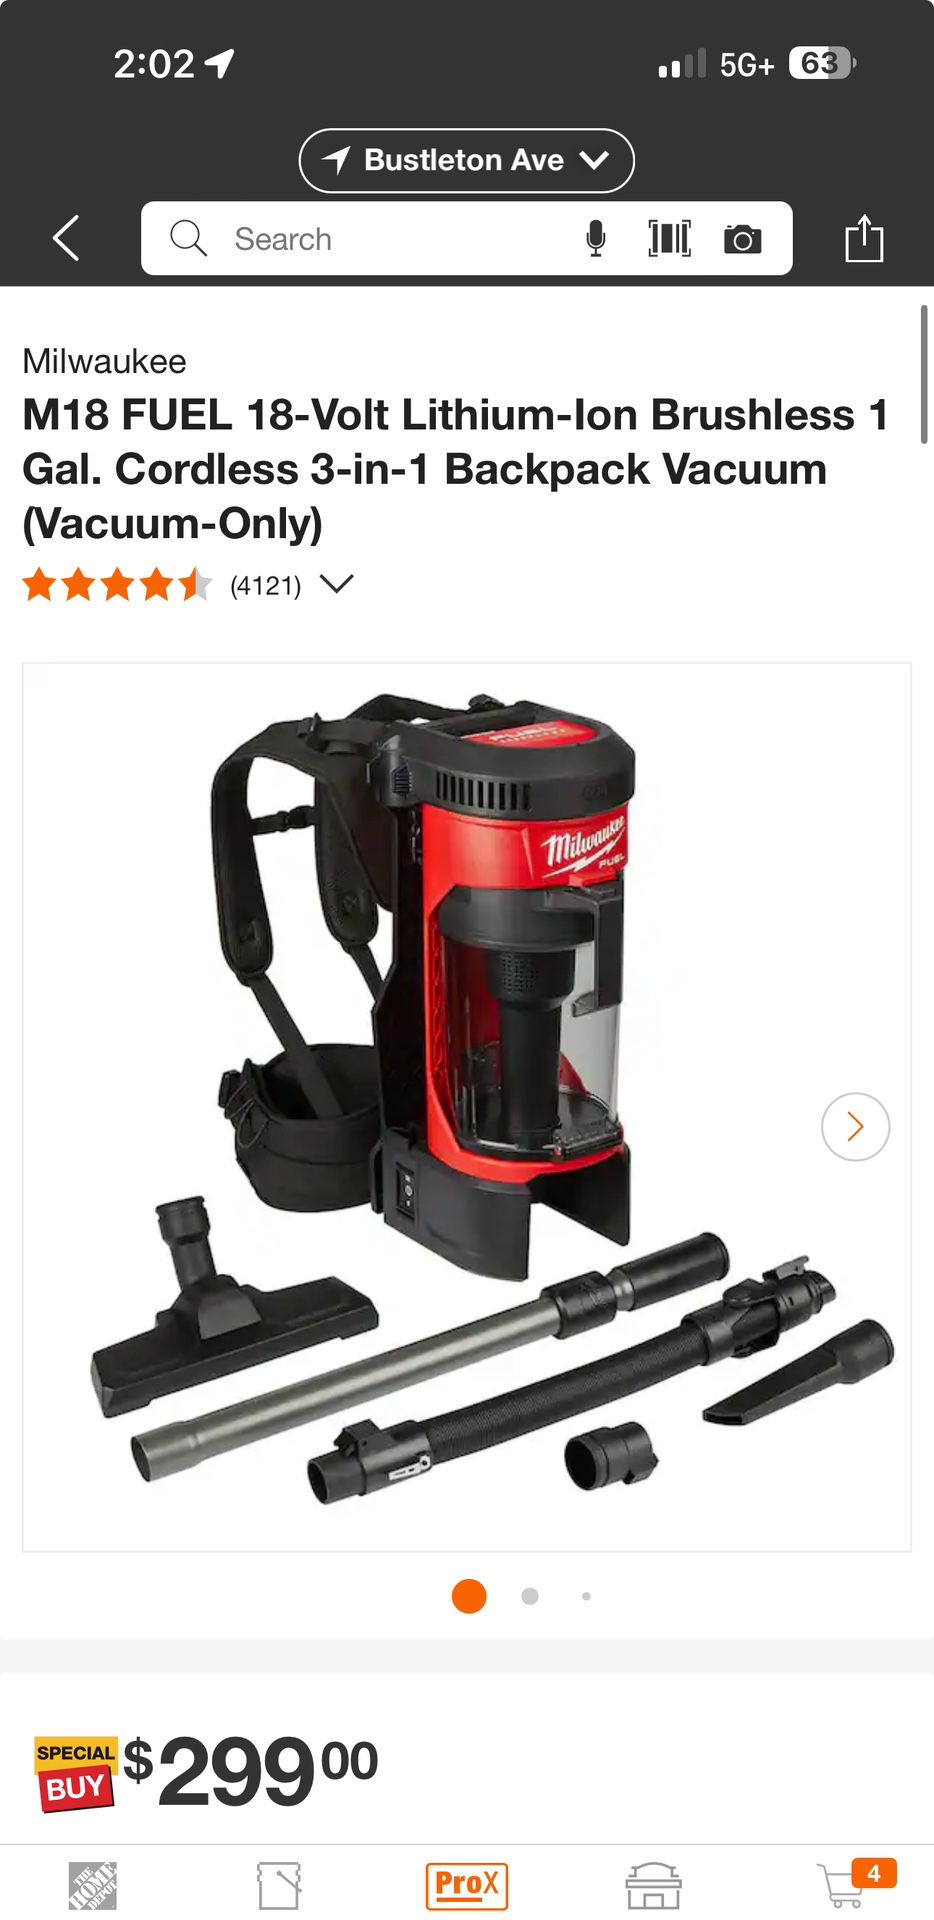 M18 FUEL 18-Volt Lithium-lon Brushless 1 Gal. Cordless 3-in-1 Backpack Vacuum (Vacuum-Only)